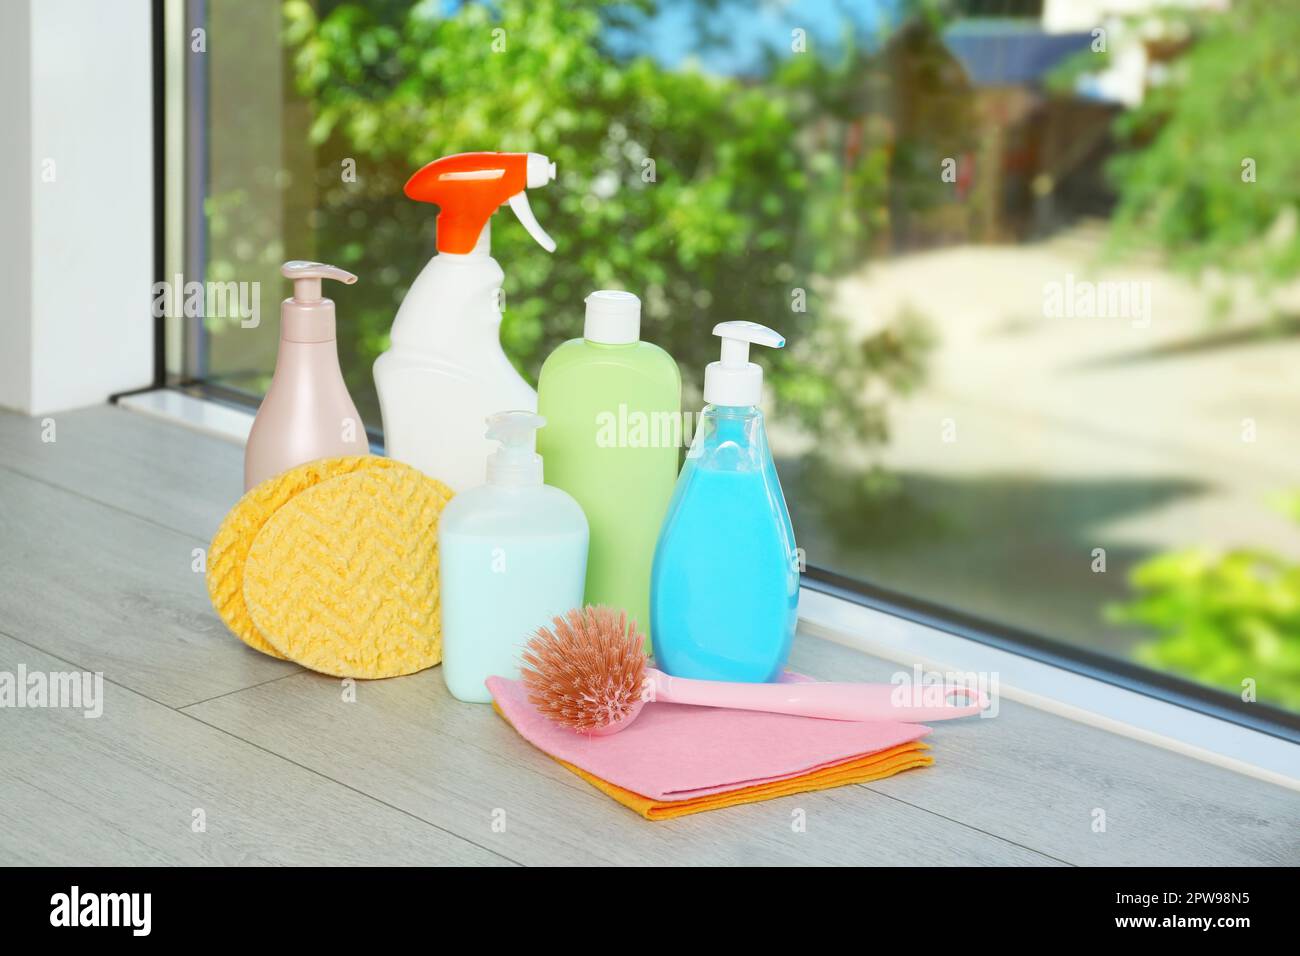 https://c8.alamy.com/comp/2PW98N5/different-cleaning-supplies-and-tools-on-window-sill-indoors-2PW98N5.jpg